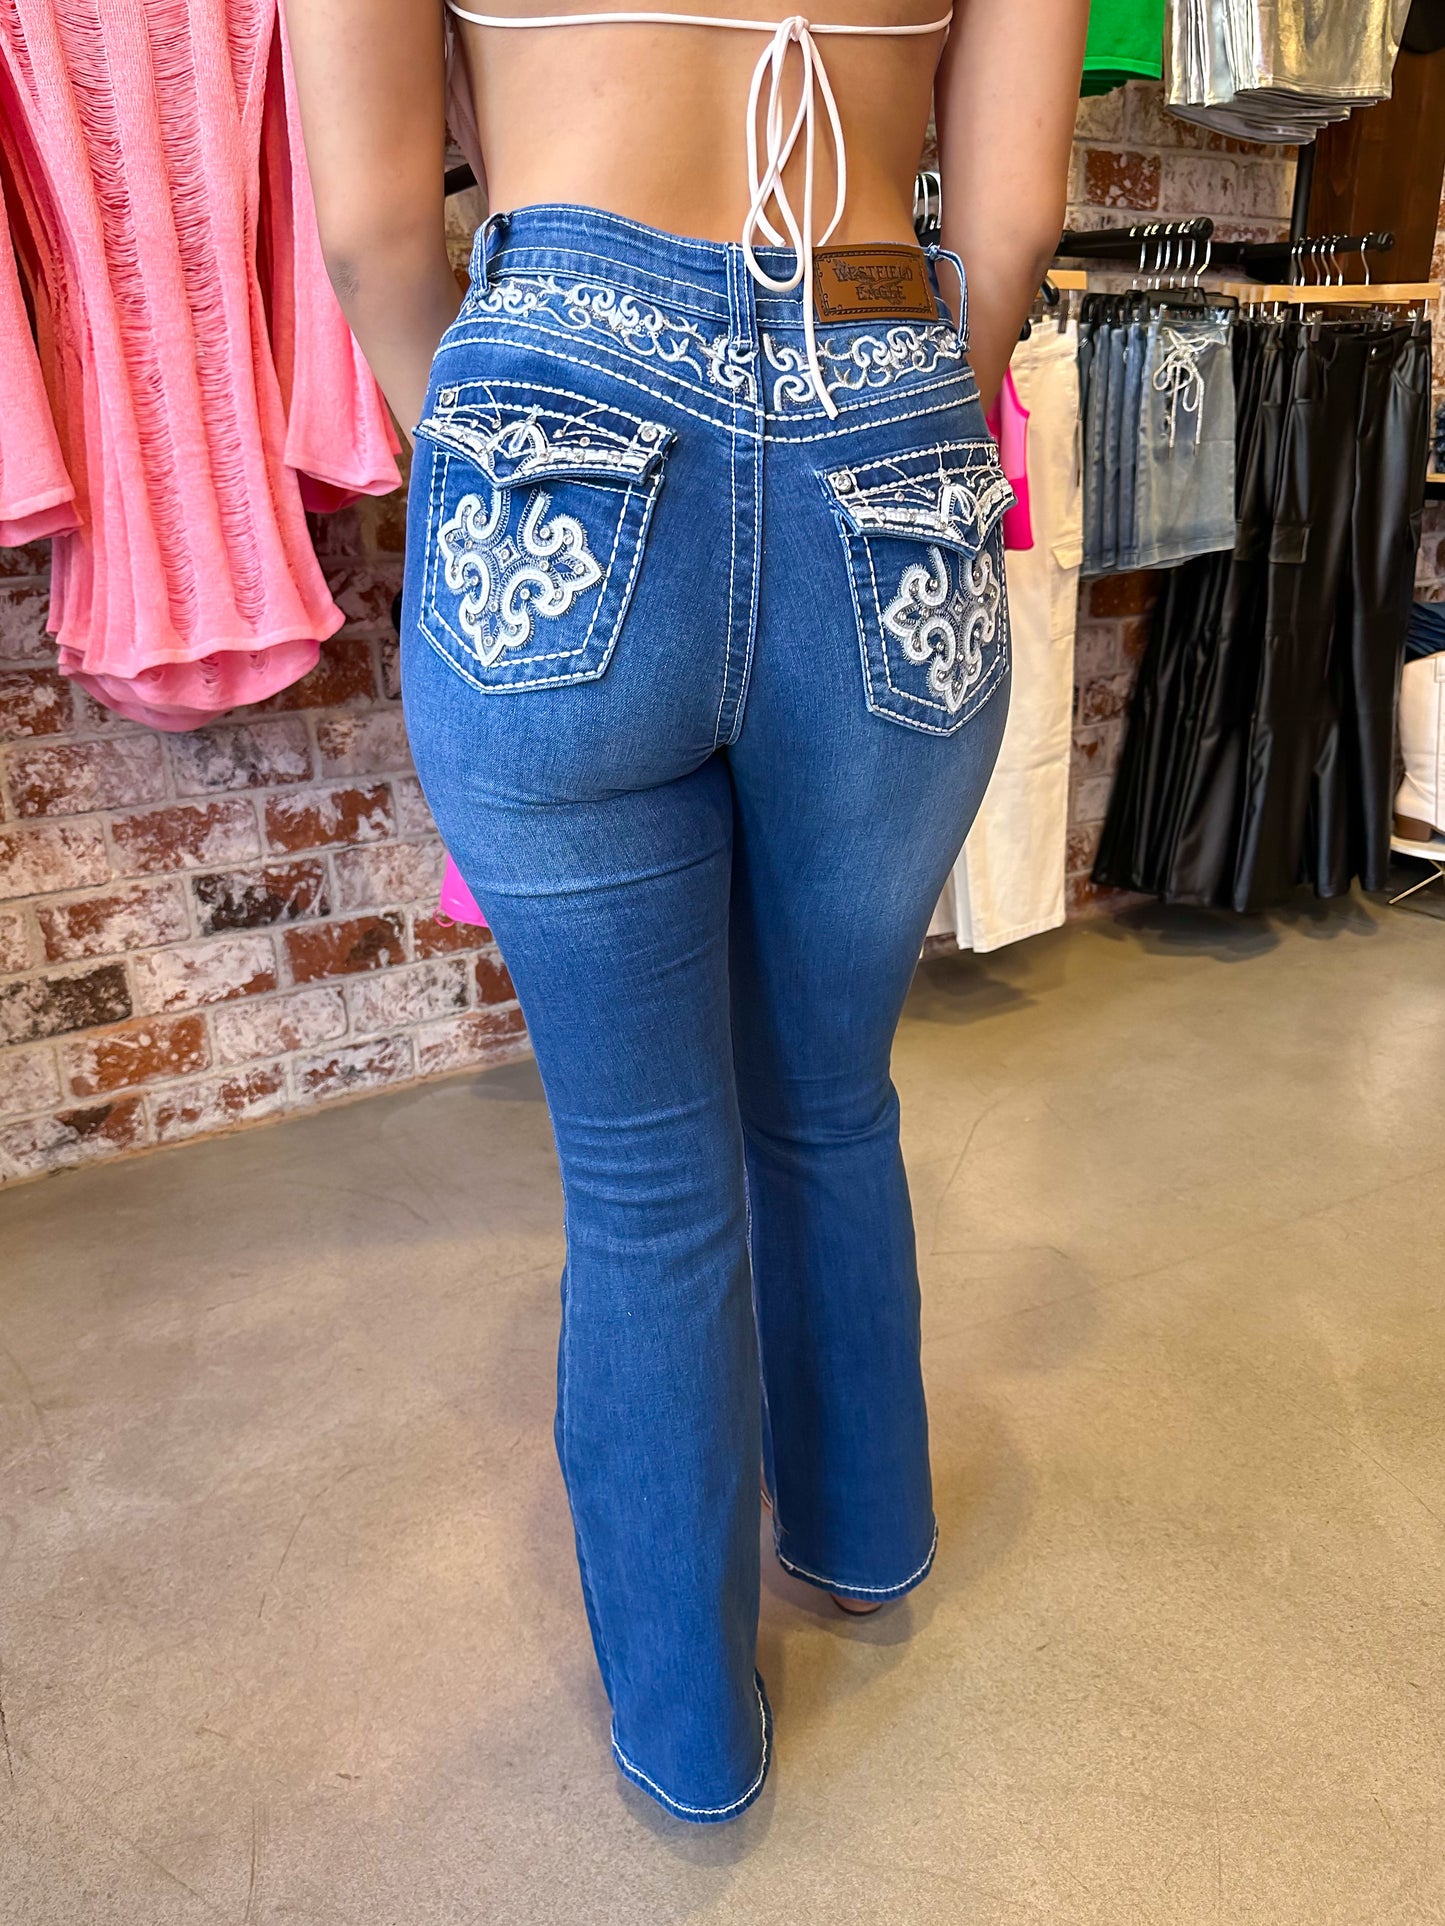 miss me jeans cowgirl